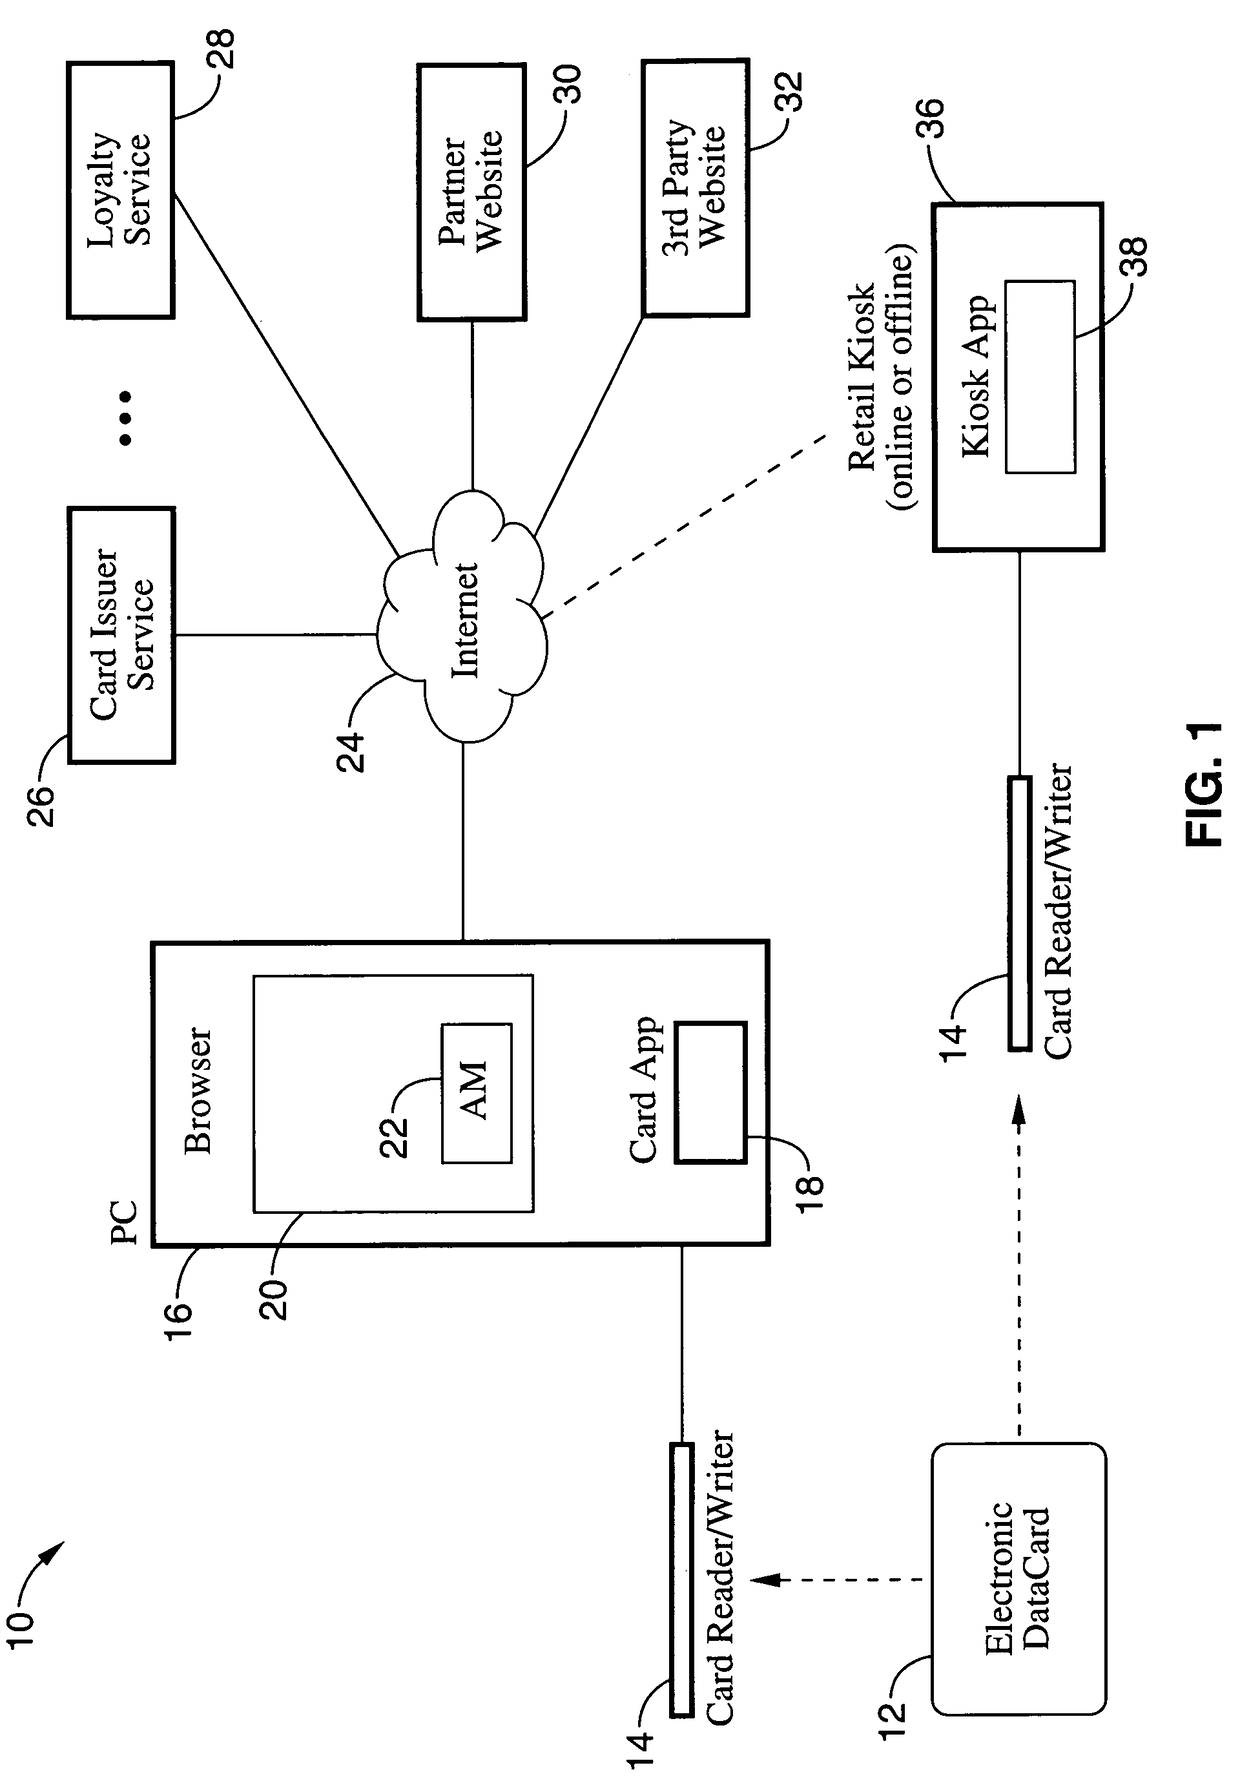 System and method for issuing and redeeming incentives on electronic data cards